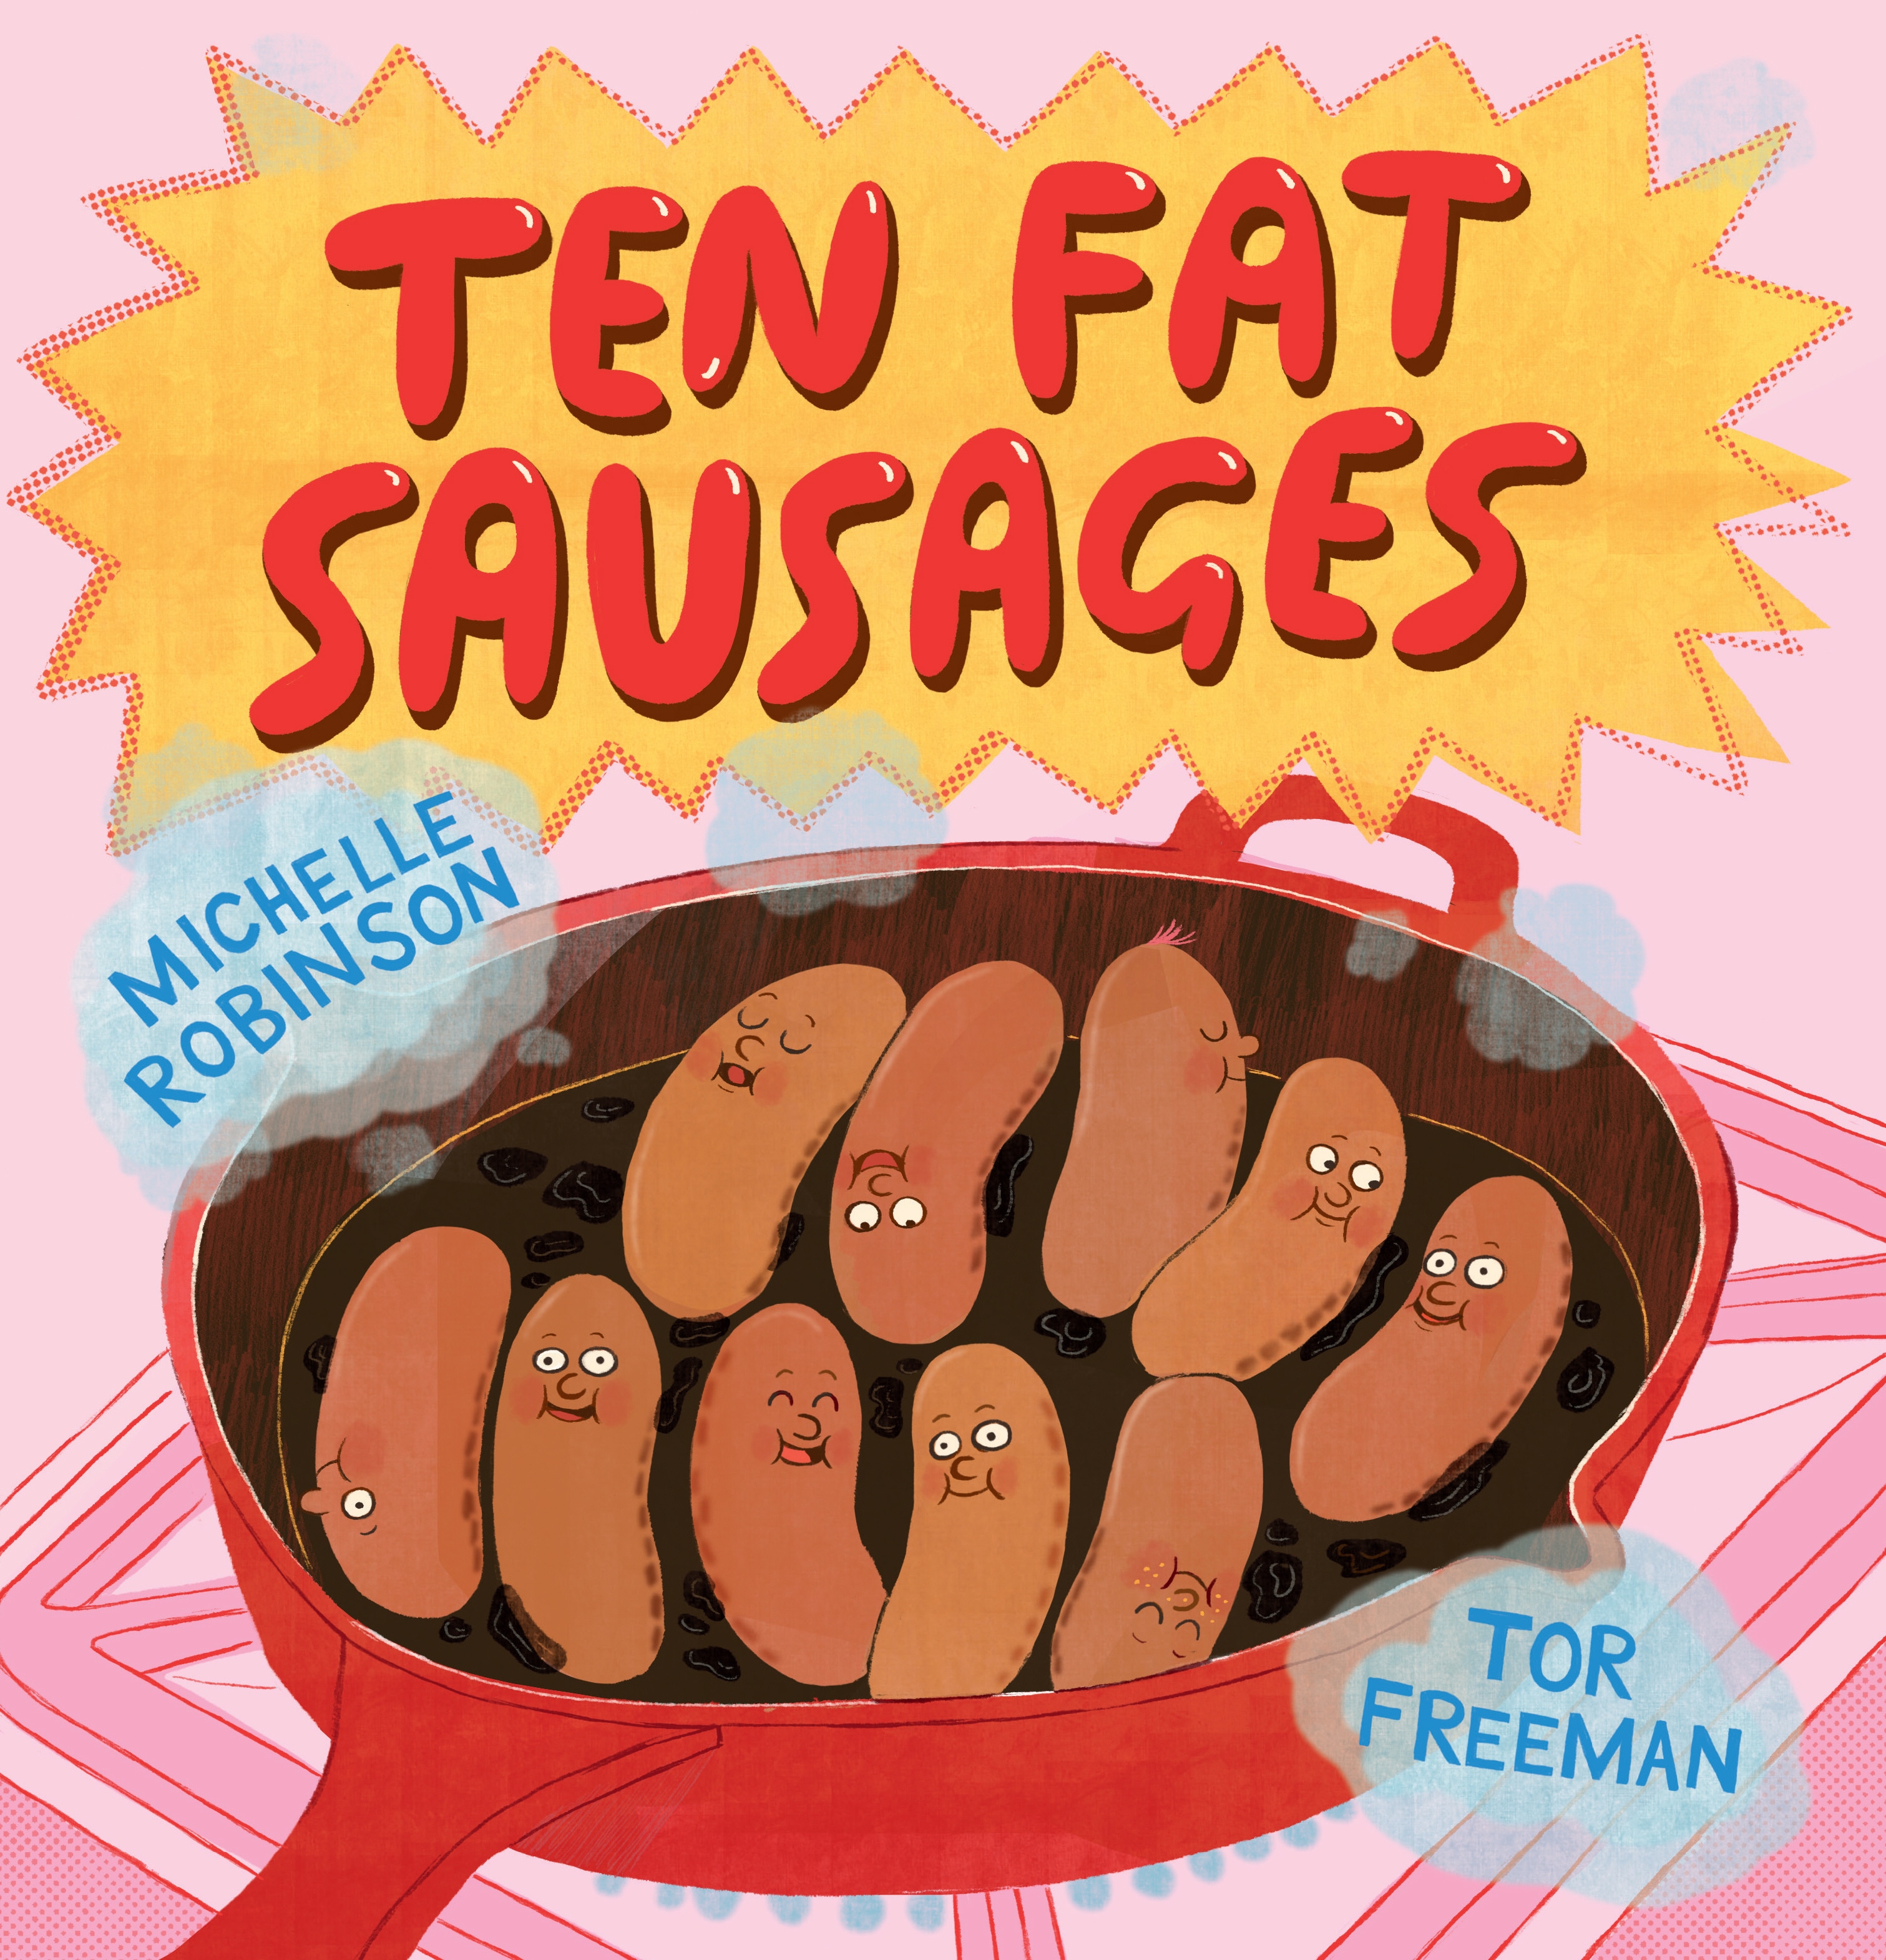 Book “Ten Fat Sausages” by Michelle Robinson — February 7, 2019